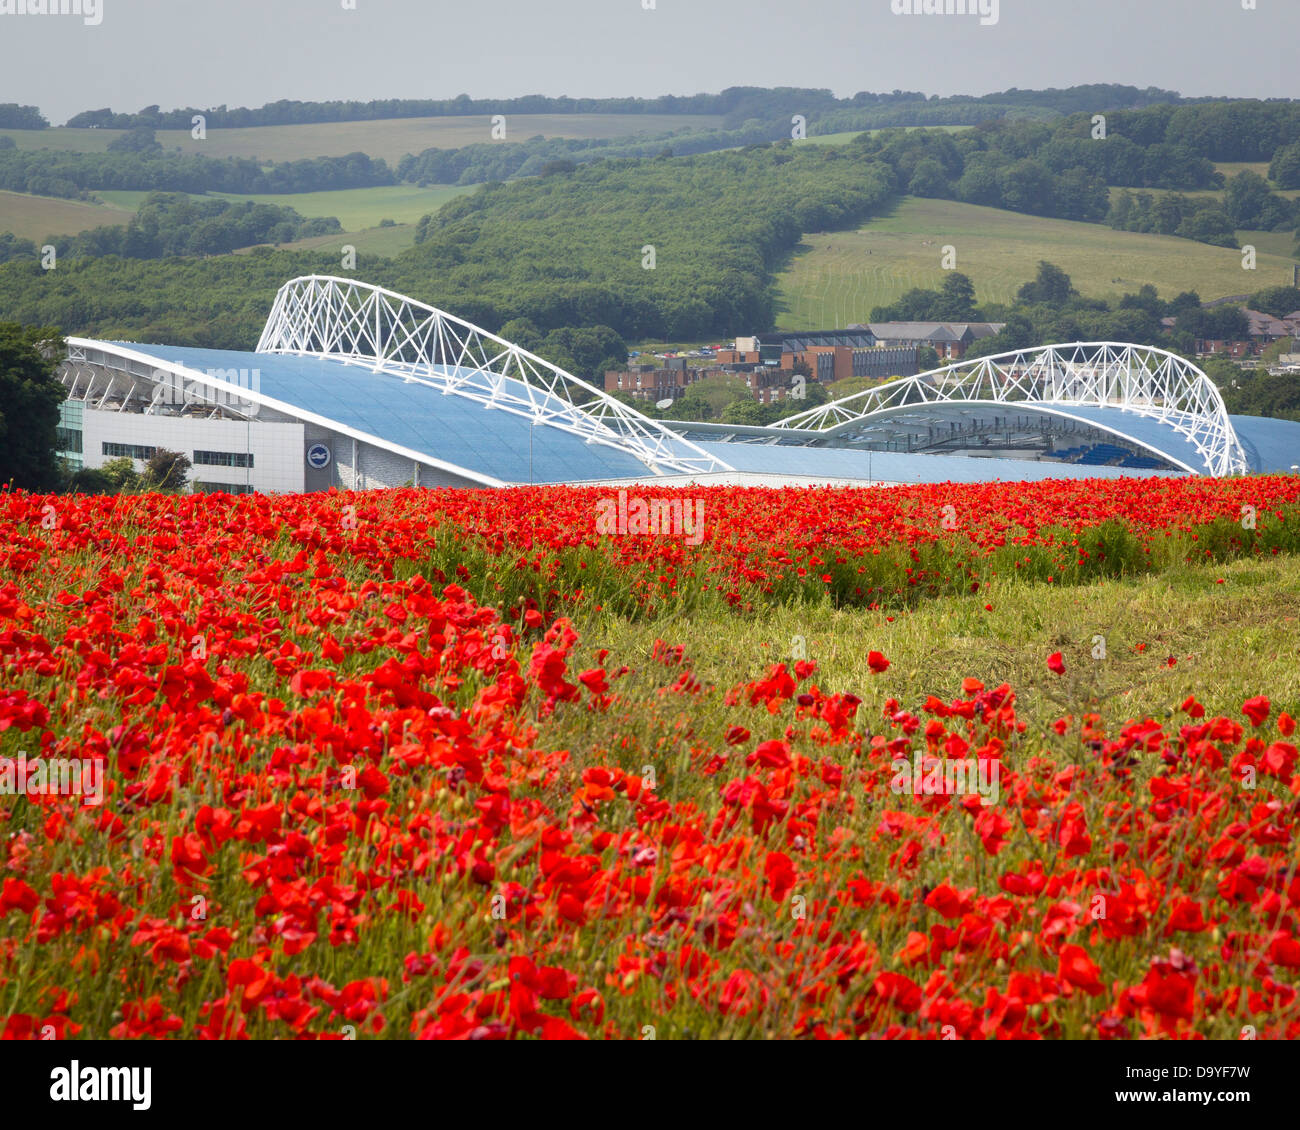 The American Express Community Stadium Brighton - looking across the poppy field on Bevendean Down, Falmer Stock Photo